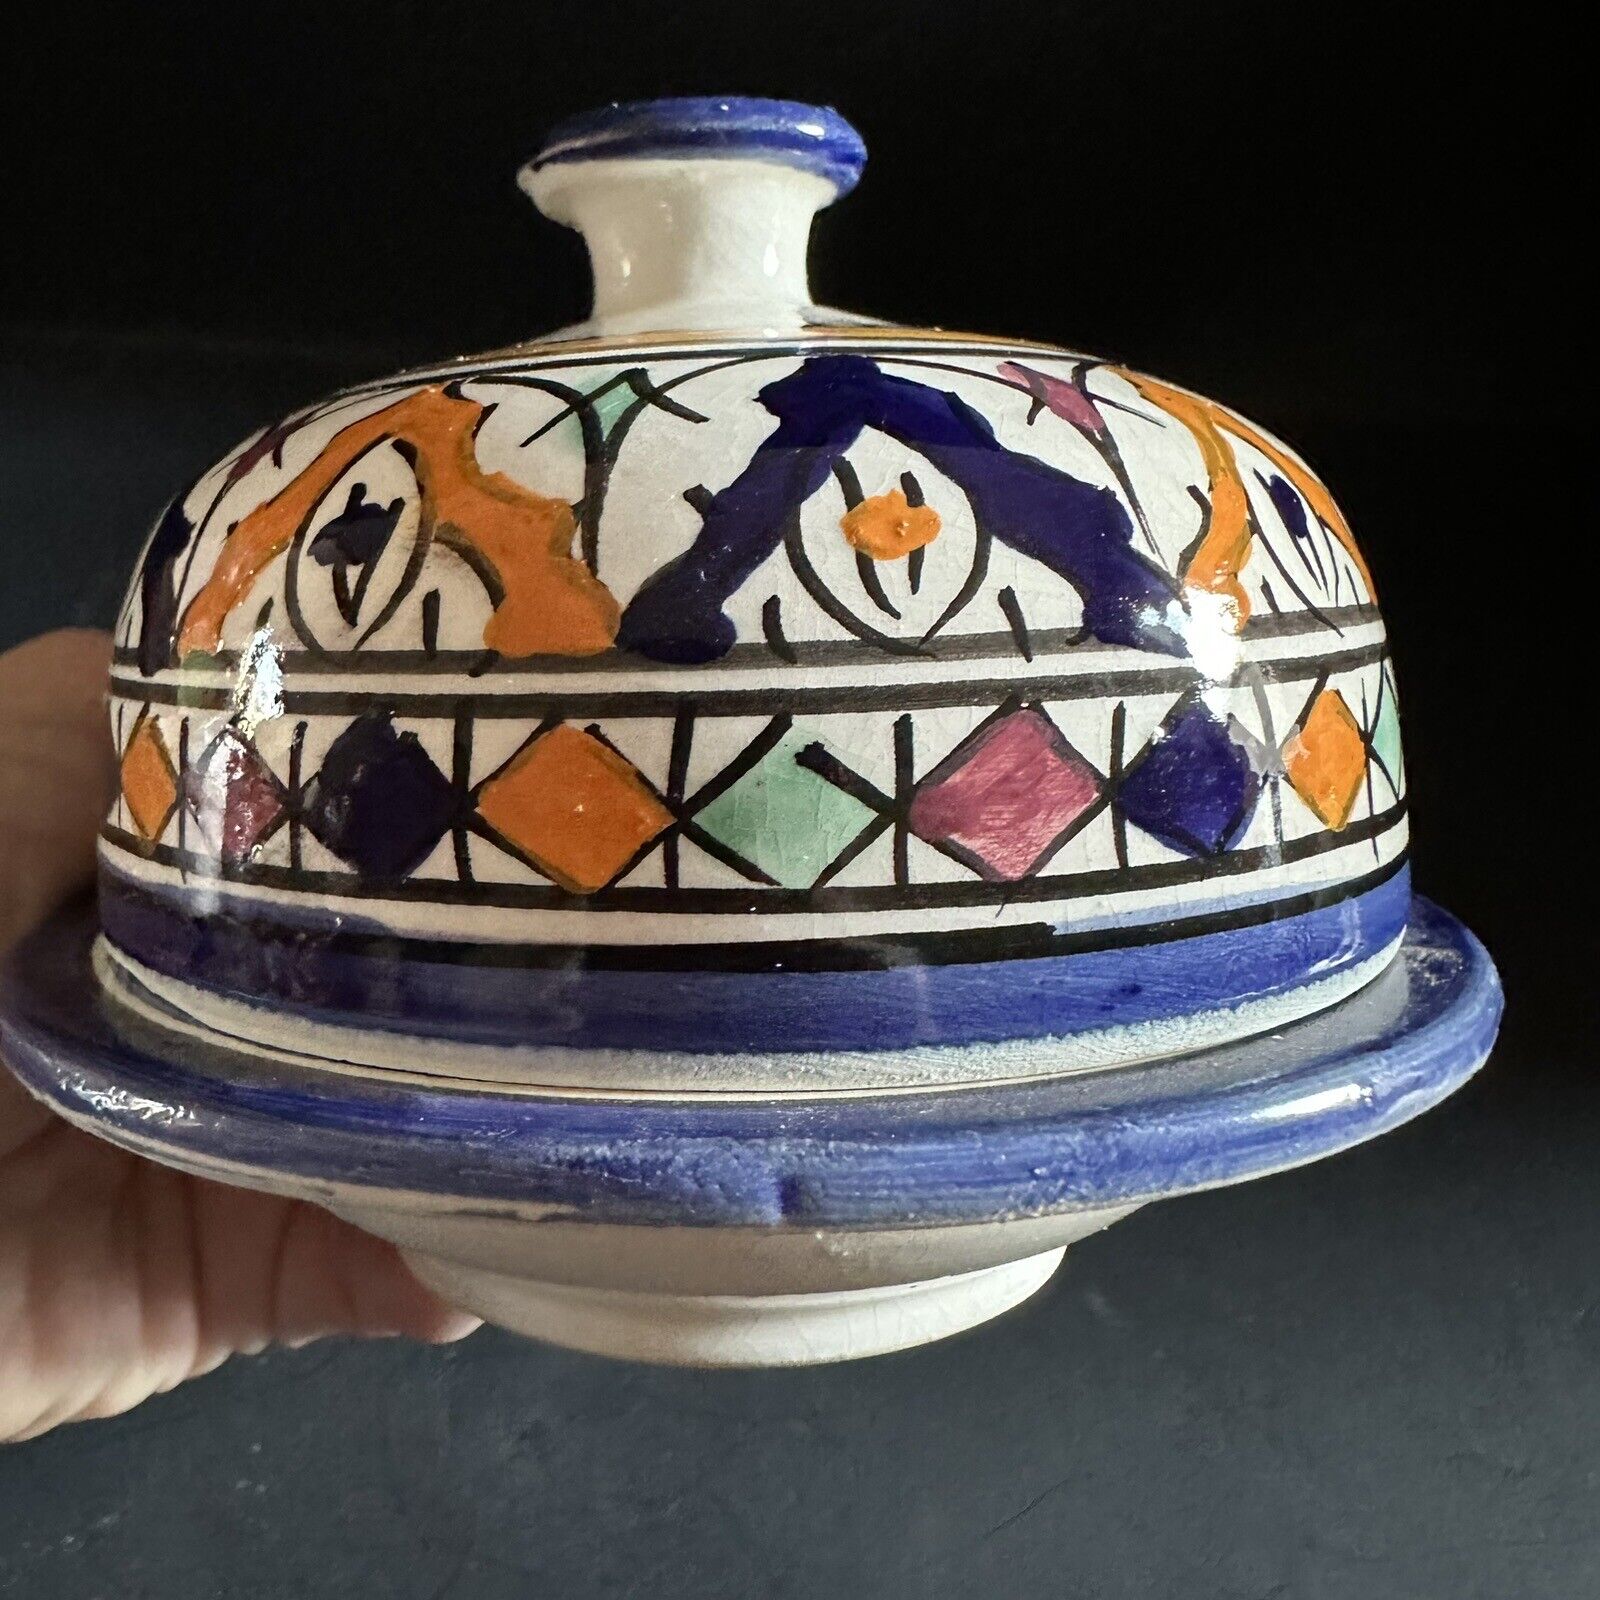 Vintage Fes Ceramic Glazed Covered Dish Bowl Moroccan Colorful Pottery EUC